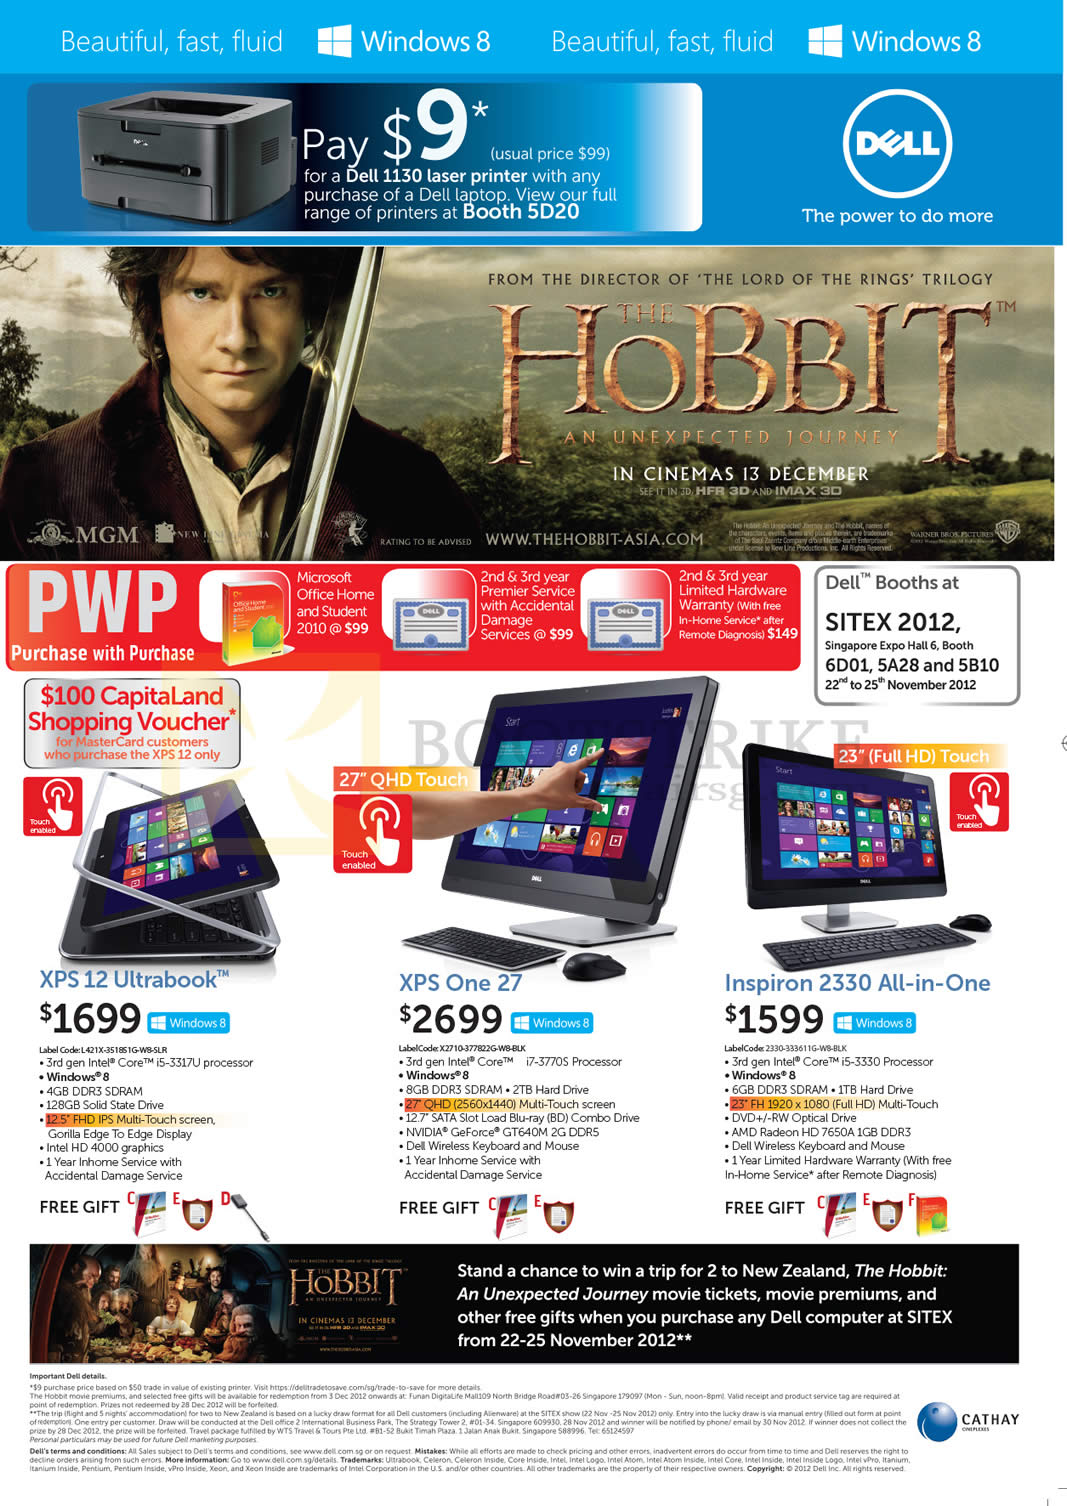 SITEX 2012 price list image brochure of Dell Notebooks XPS 12 Ultrabook Notebook, AIO Desktop PC XPS One 27, Inspiron 2330